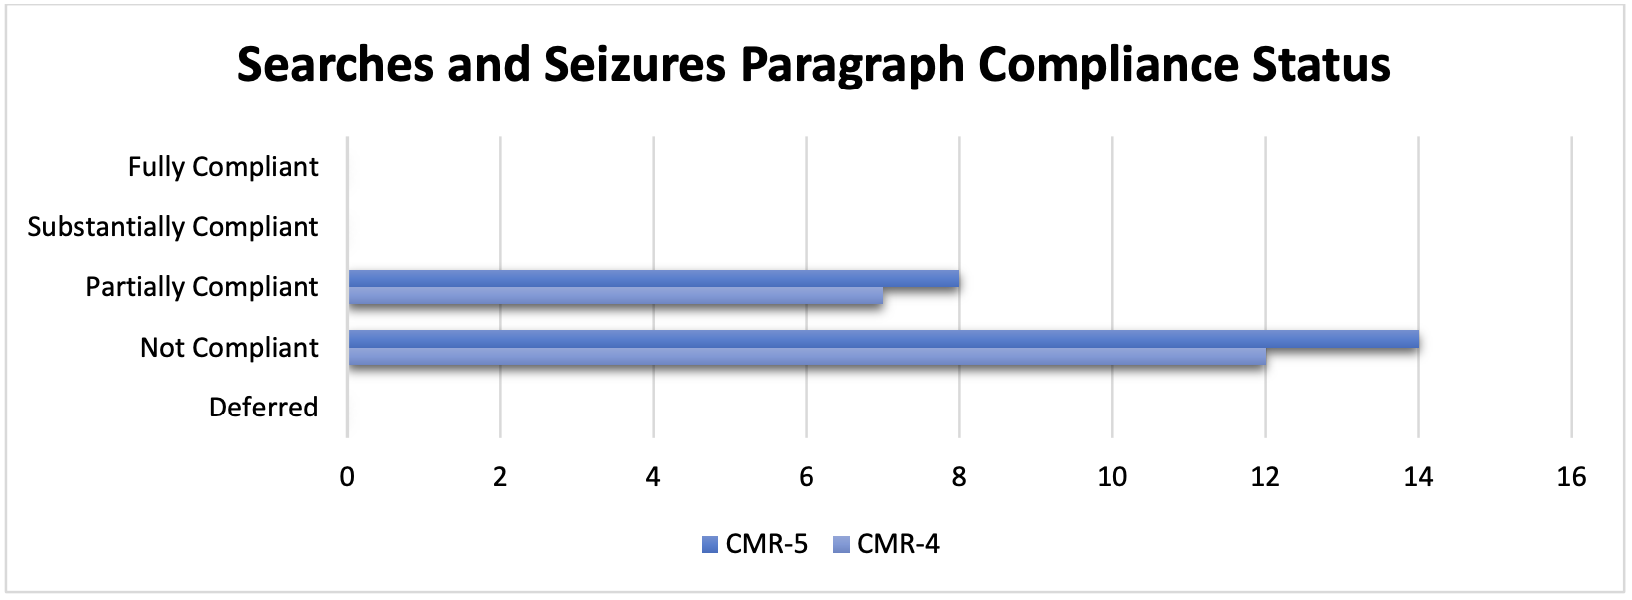 Figure 4. Searches and Seizures: Paragraph Compliance Status